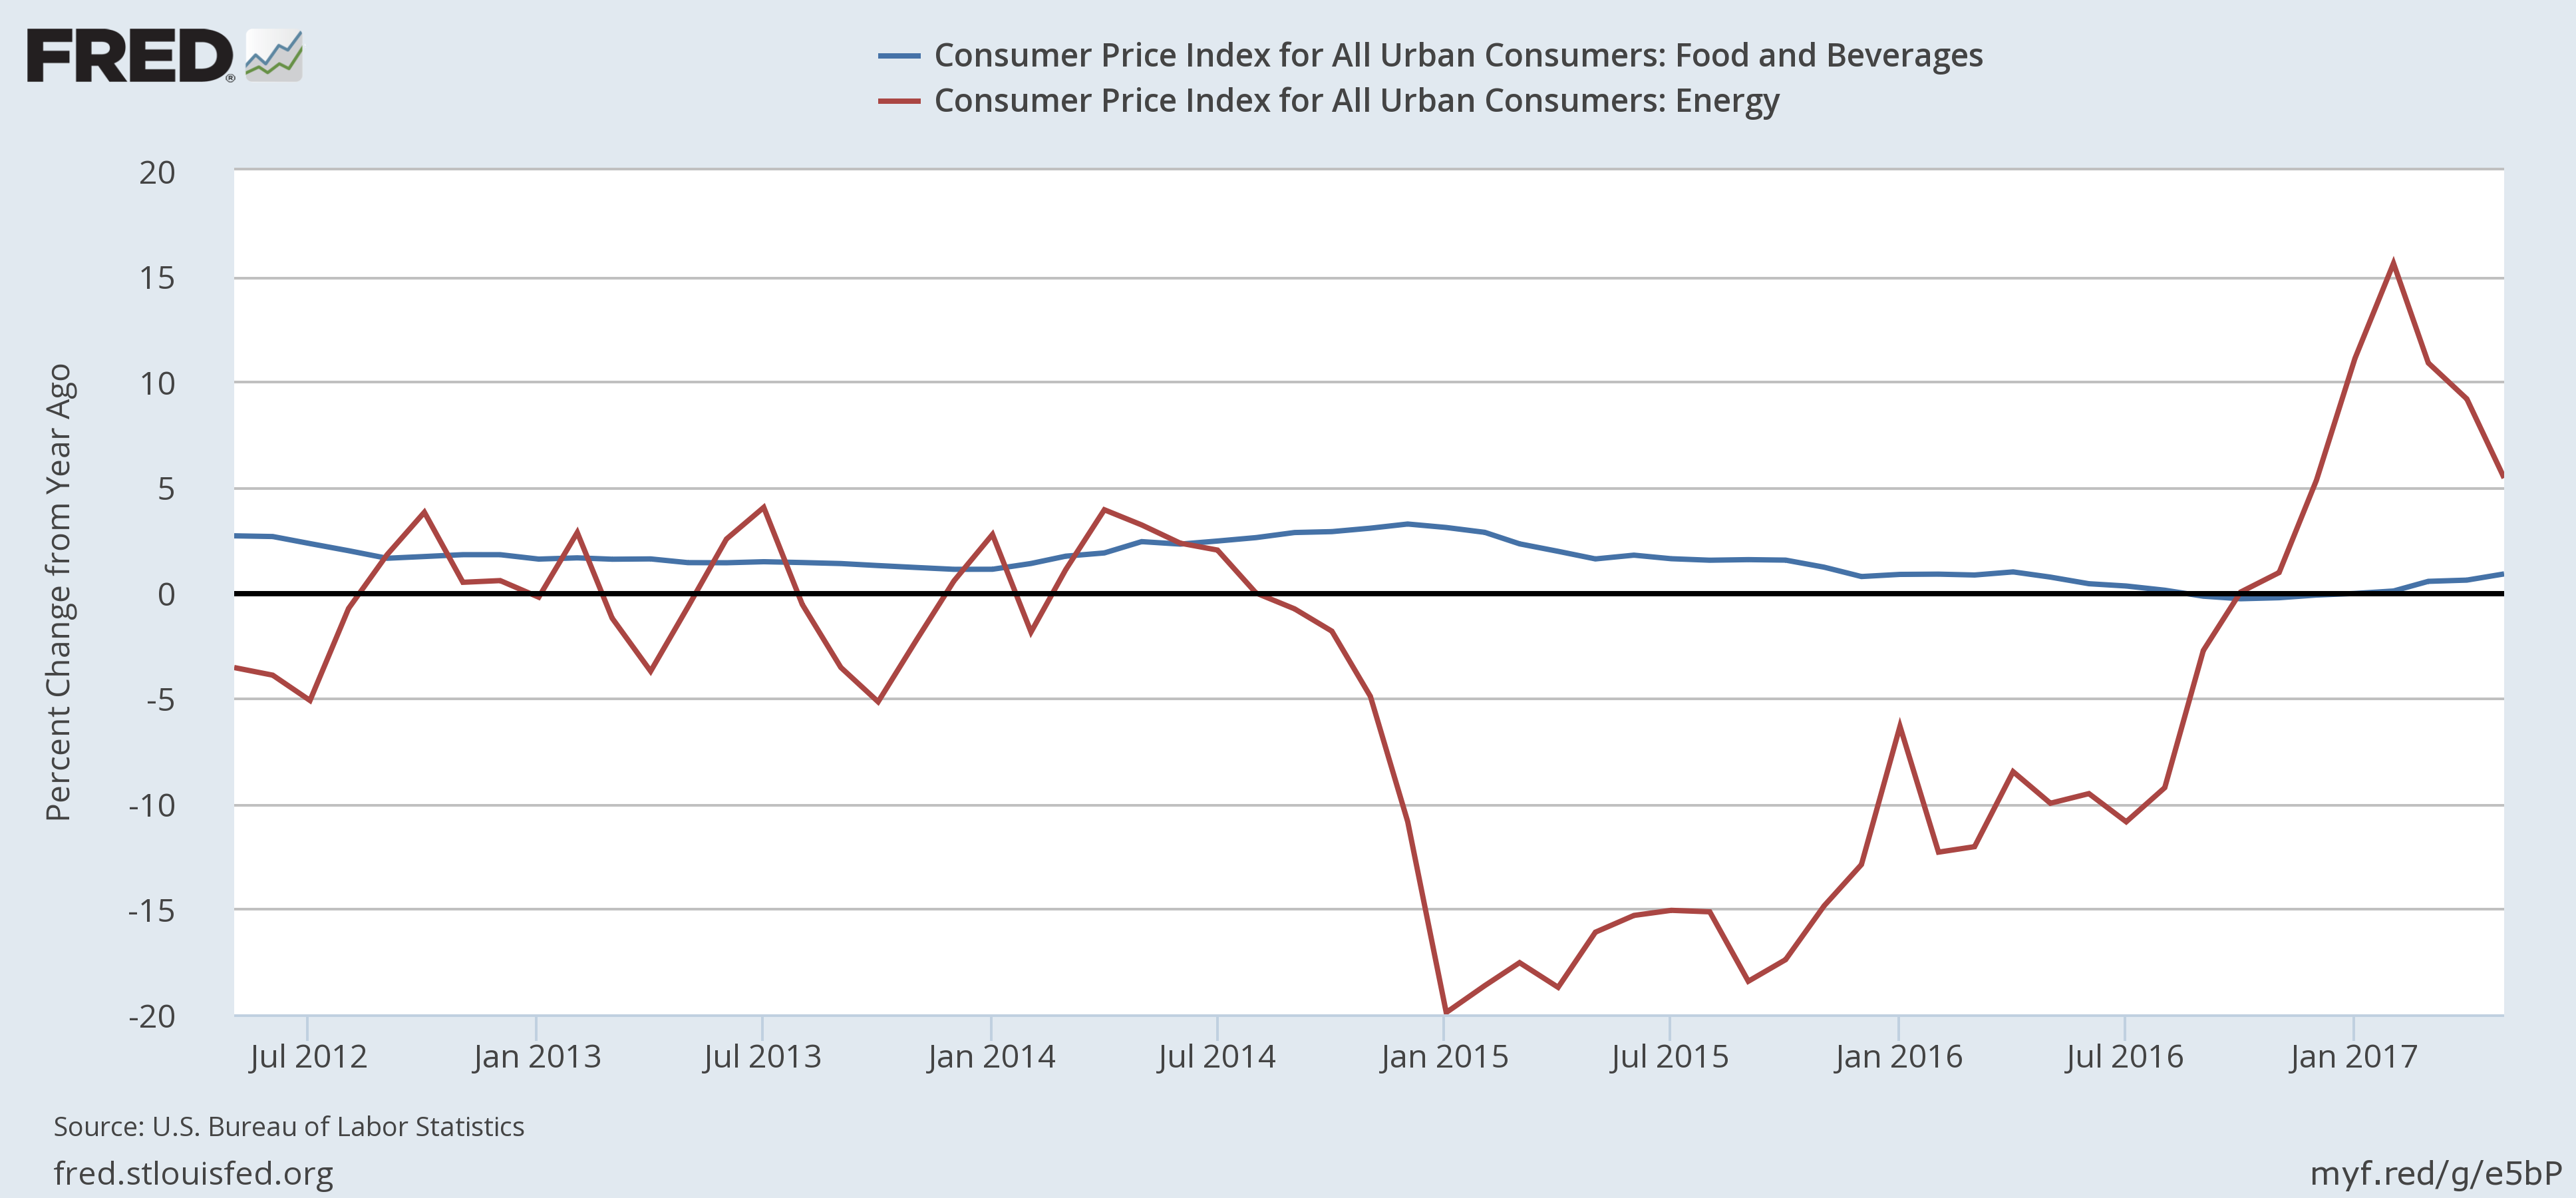 CPI For All Urban Consumers- Food, Beverage And Energy